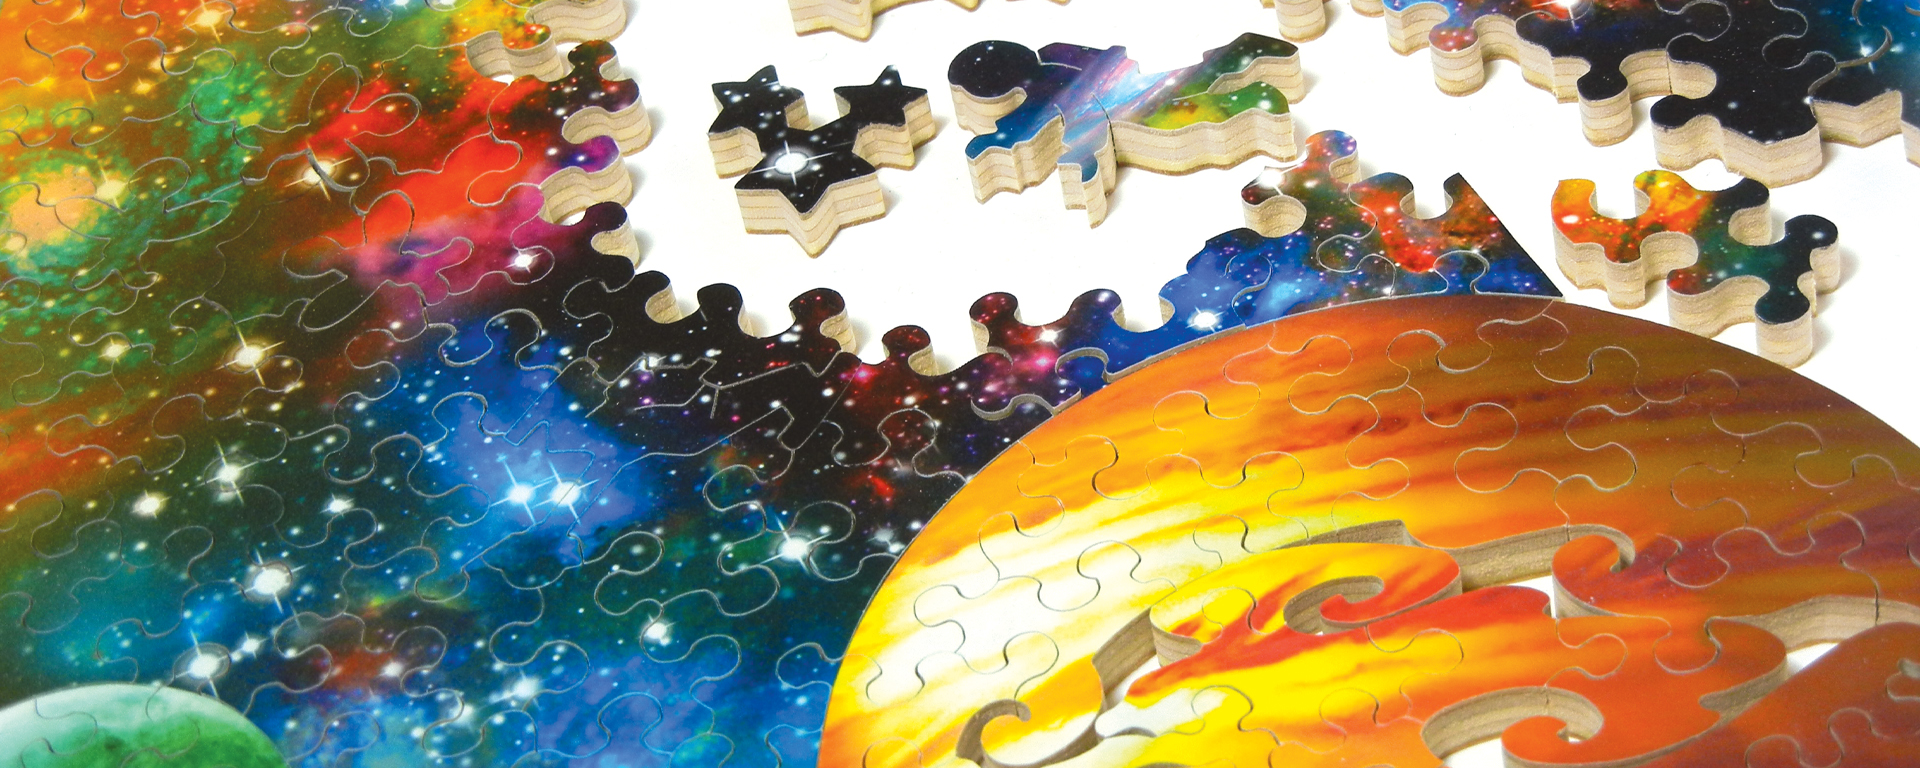 Wooden traditional jigsaw puzzle featuring a close up of outerspace. The custom cut shapes in the puzzle form an astronaut and stars.